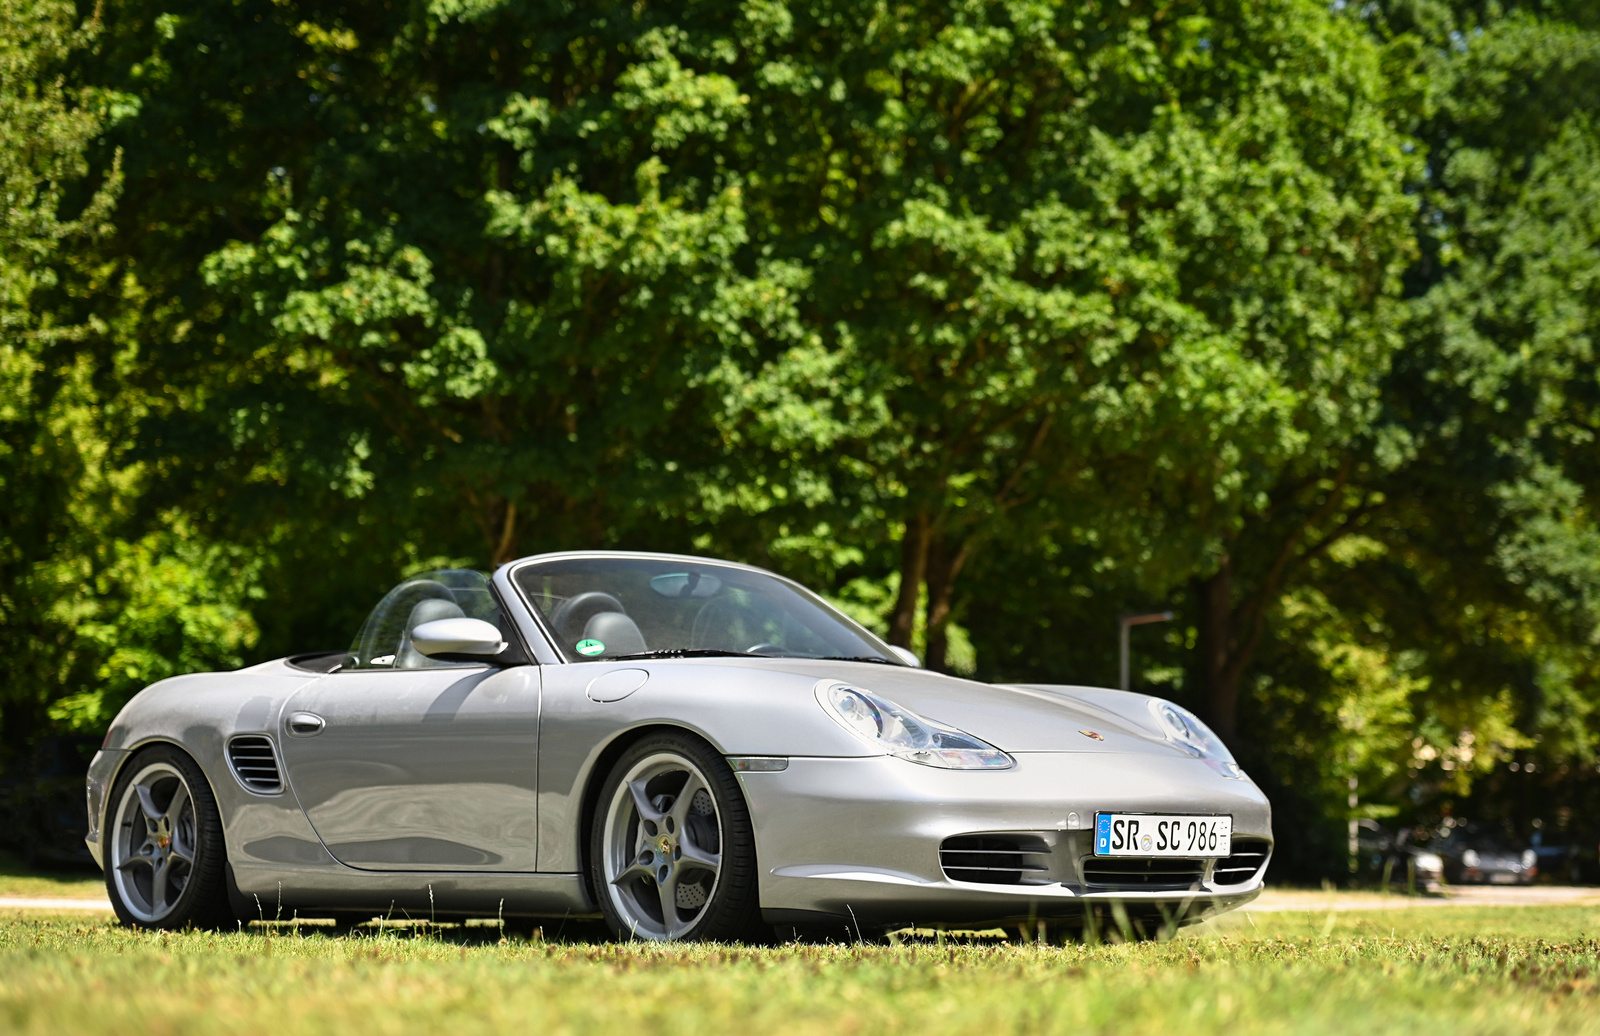 Porsche Boxster S “50 Years of the 550 Spyder” edition